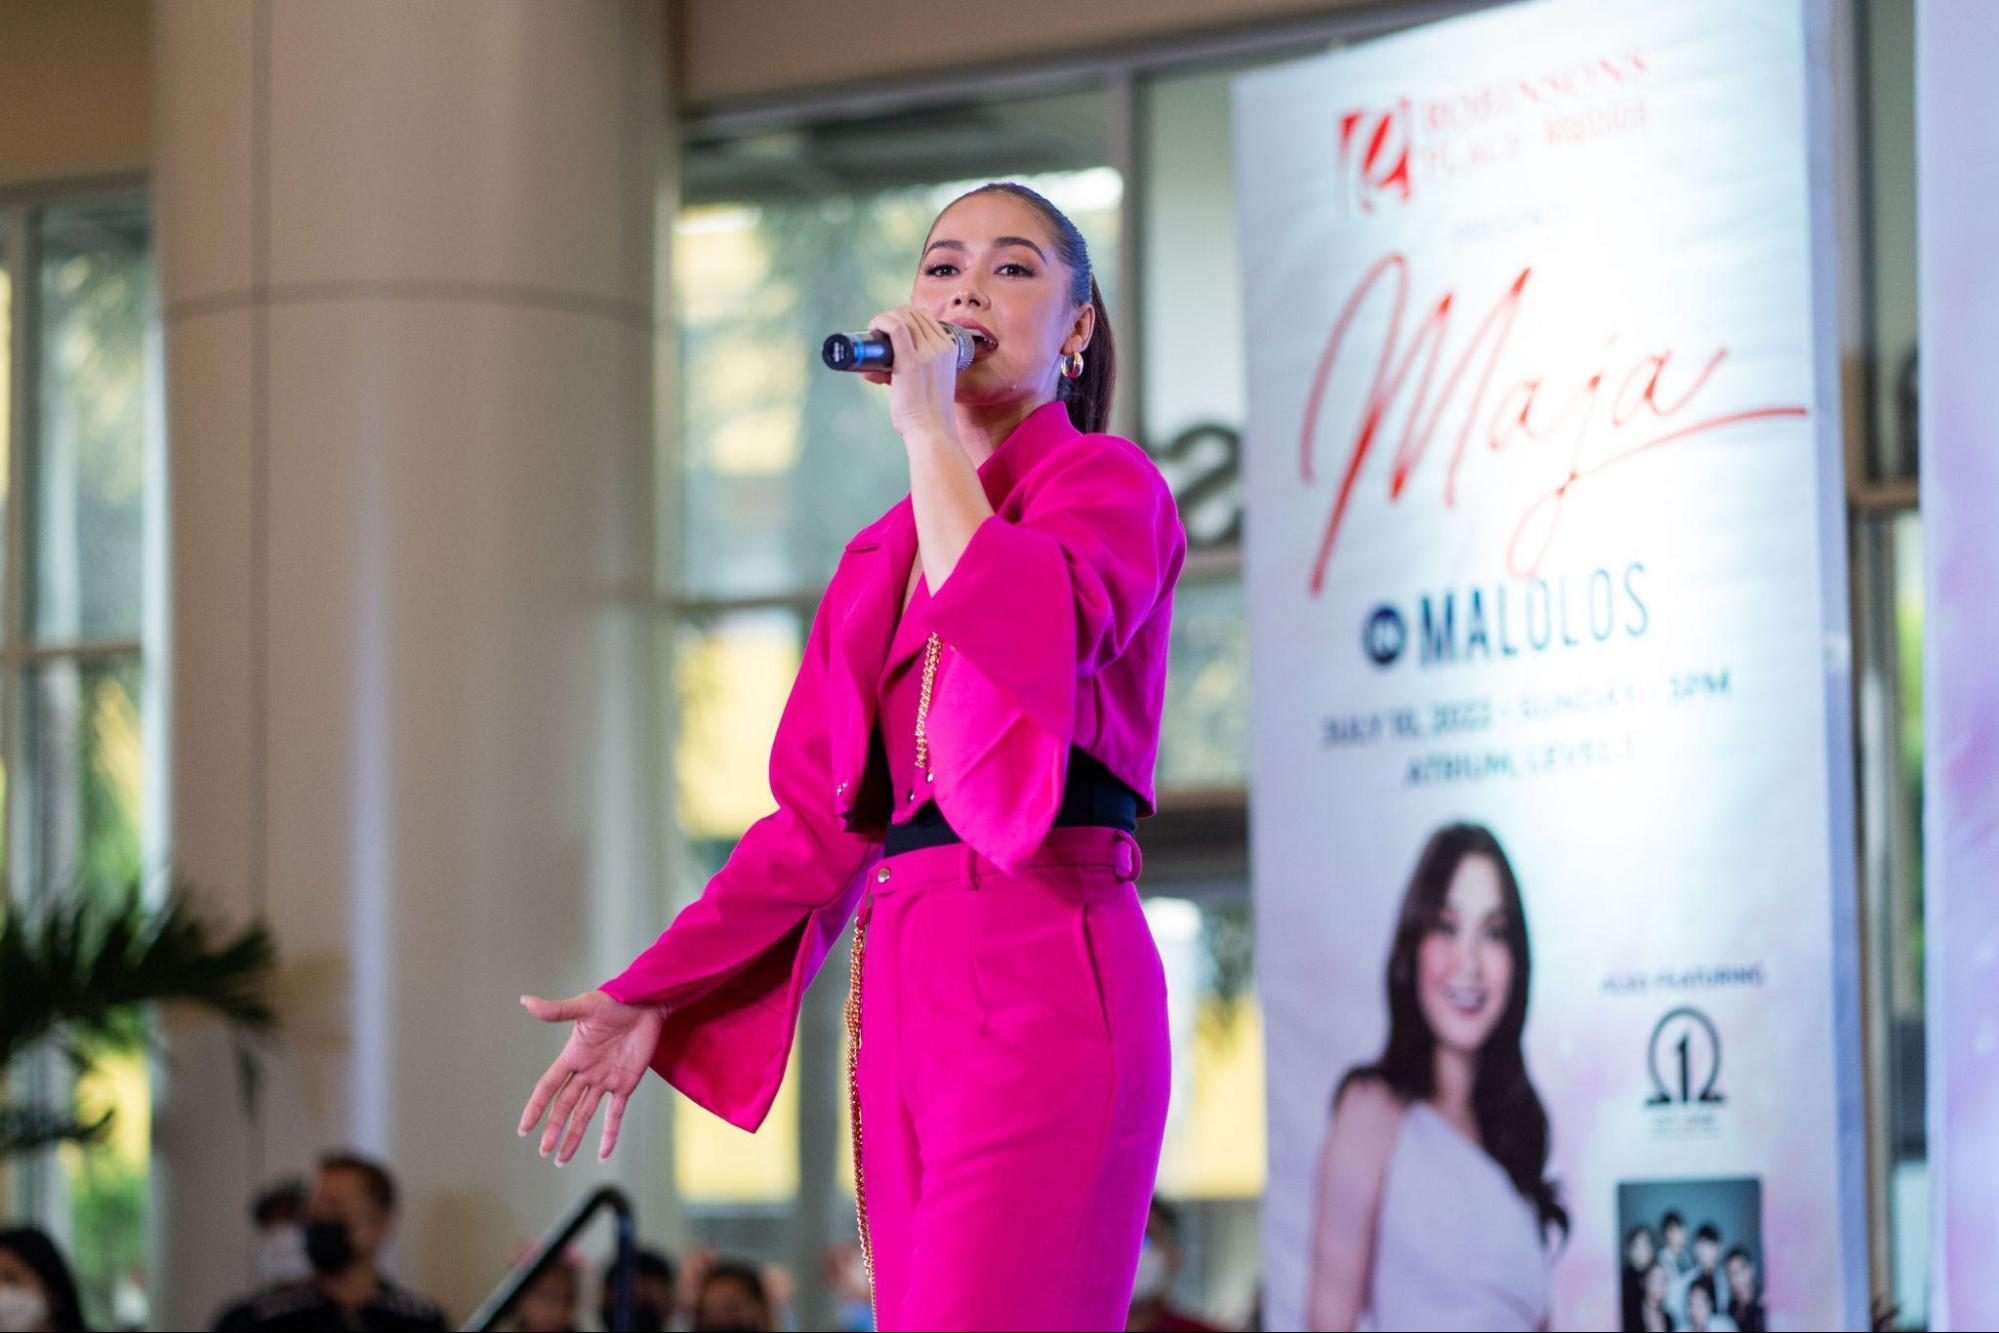 Robinsons Malls thrills customers with celebrity events and activities